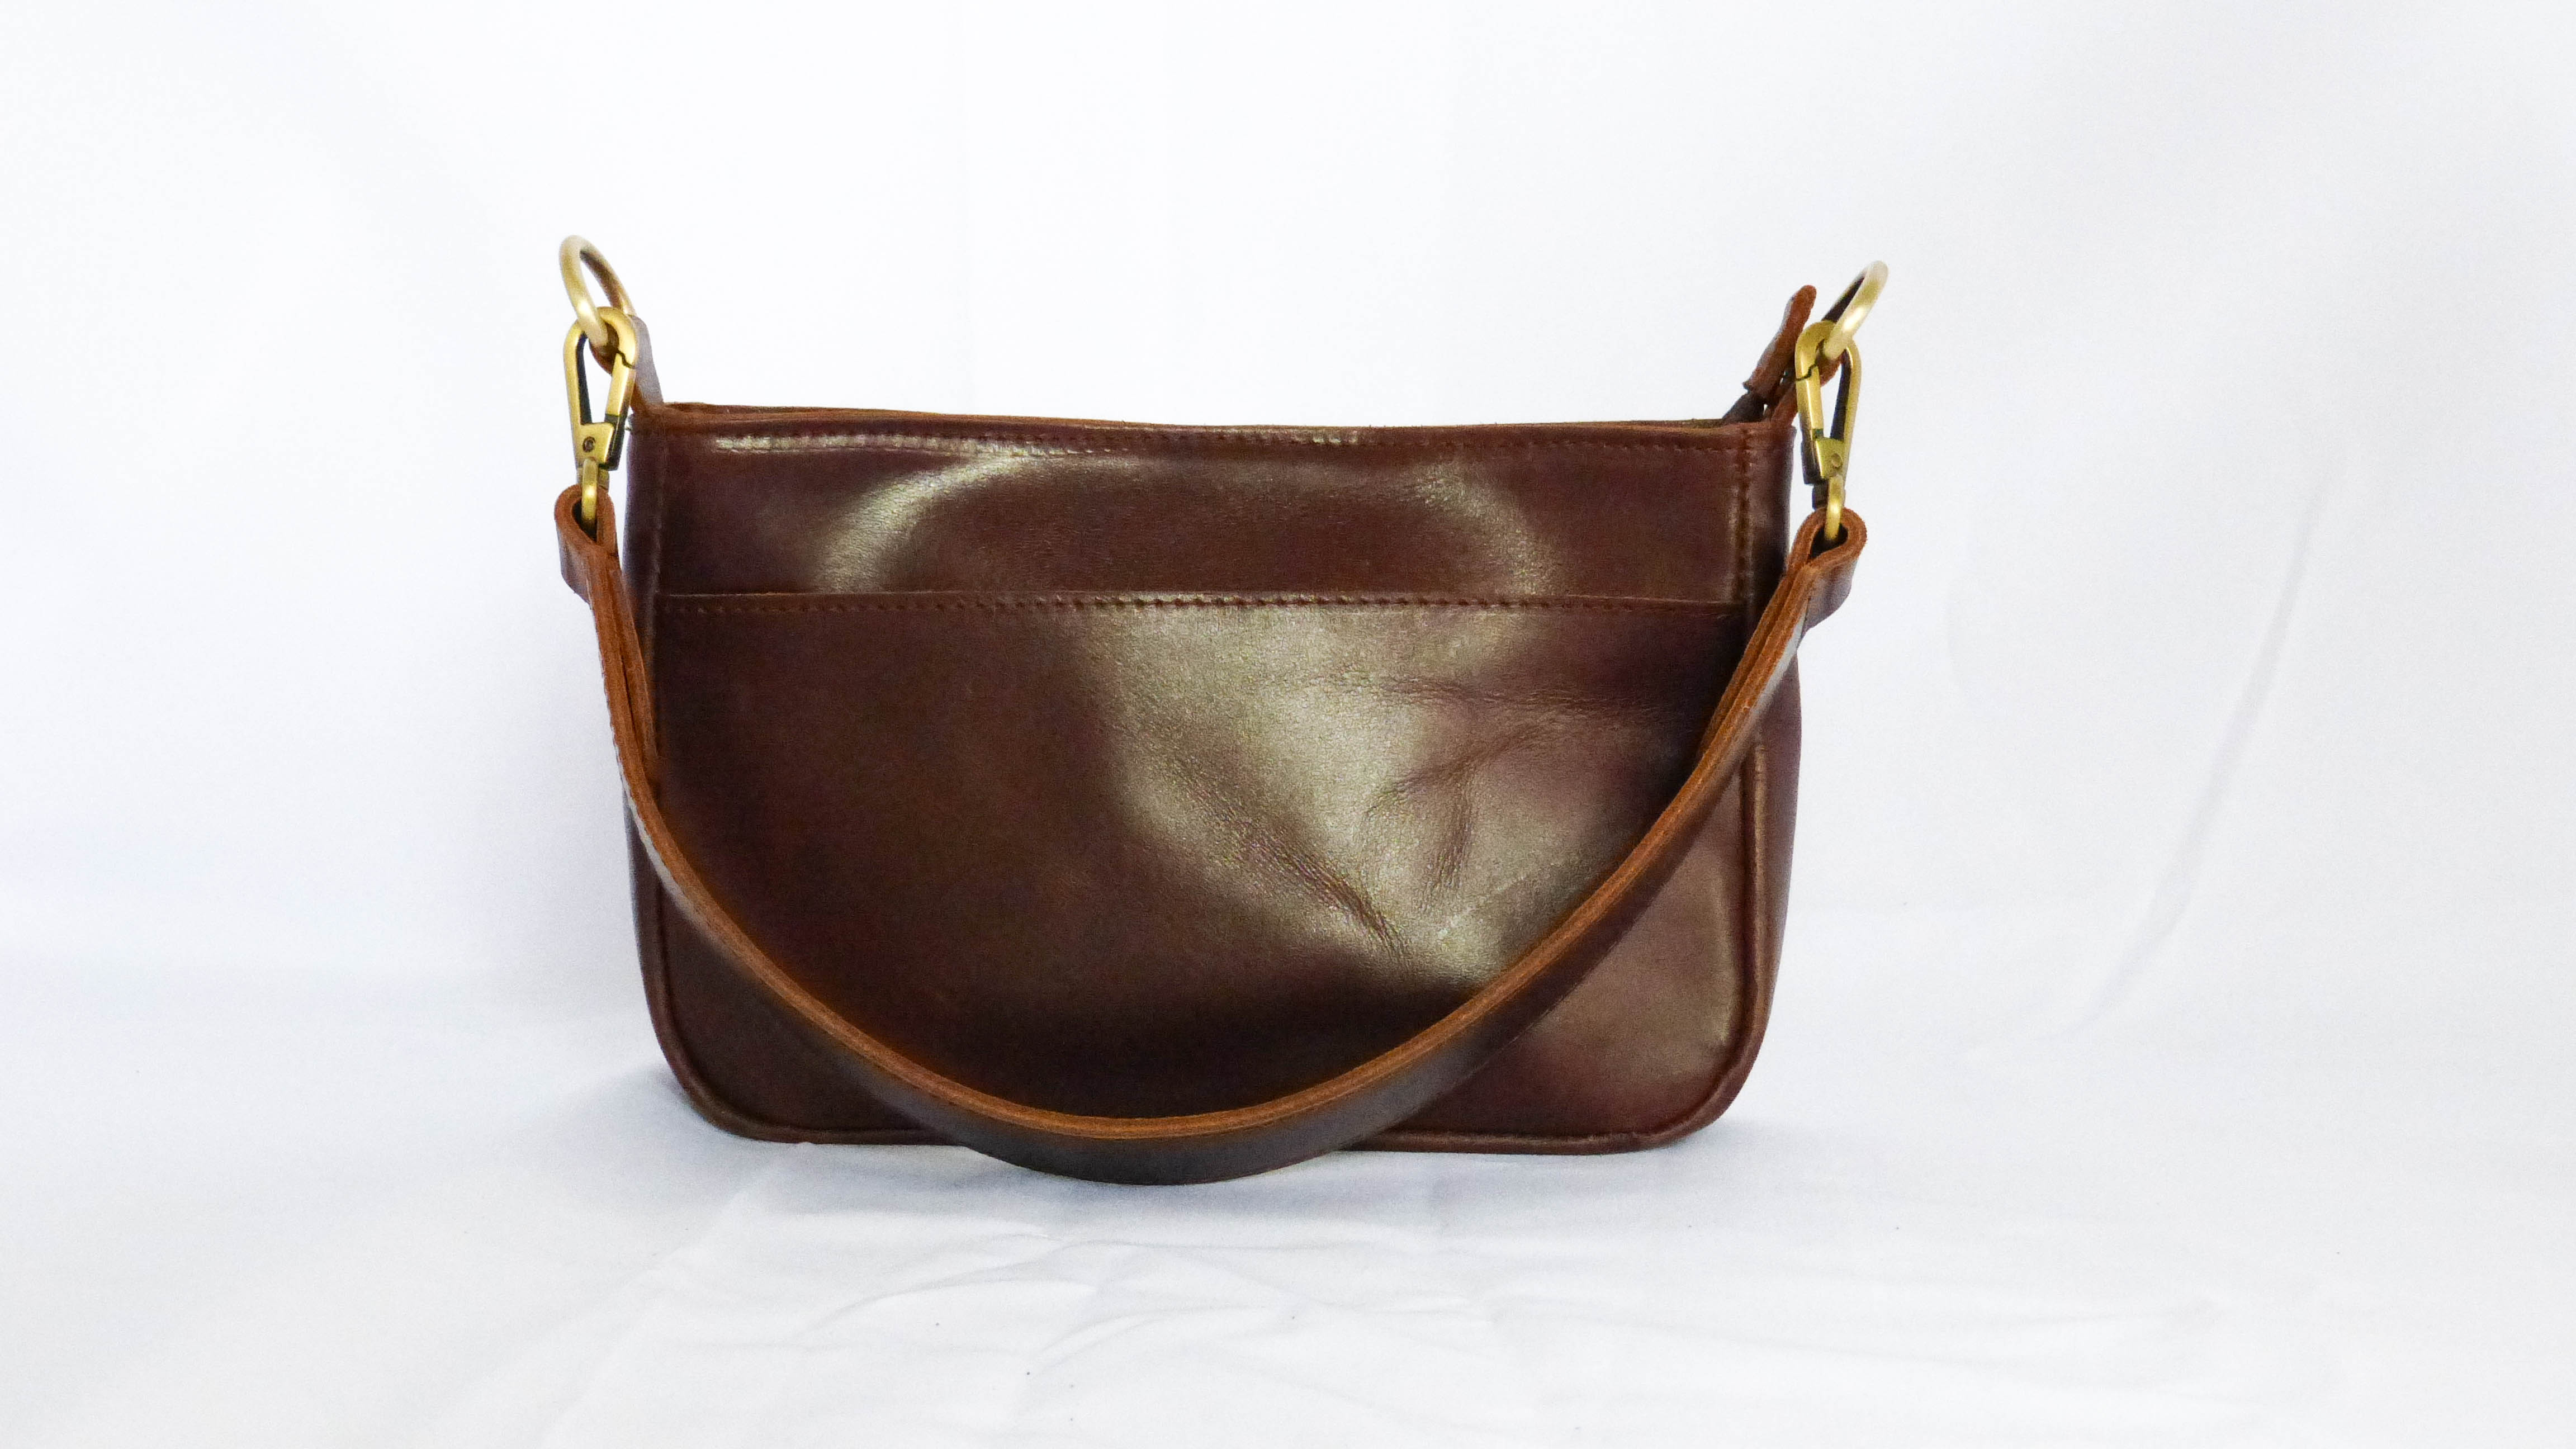 A brown leather purse with gold handles and a removable shoulder strap. Features zippered top, inside zipper pocket, and outside phone pocket. Handmade by Ethiopian artisans. Dimensions: 9 x 5.5 x 2.25.